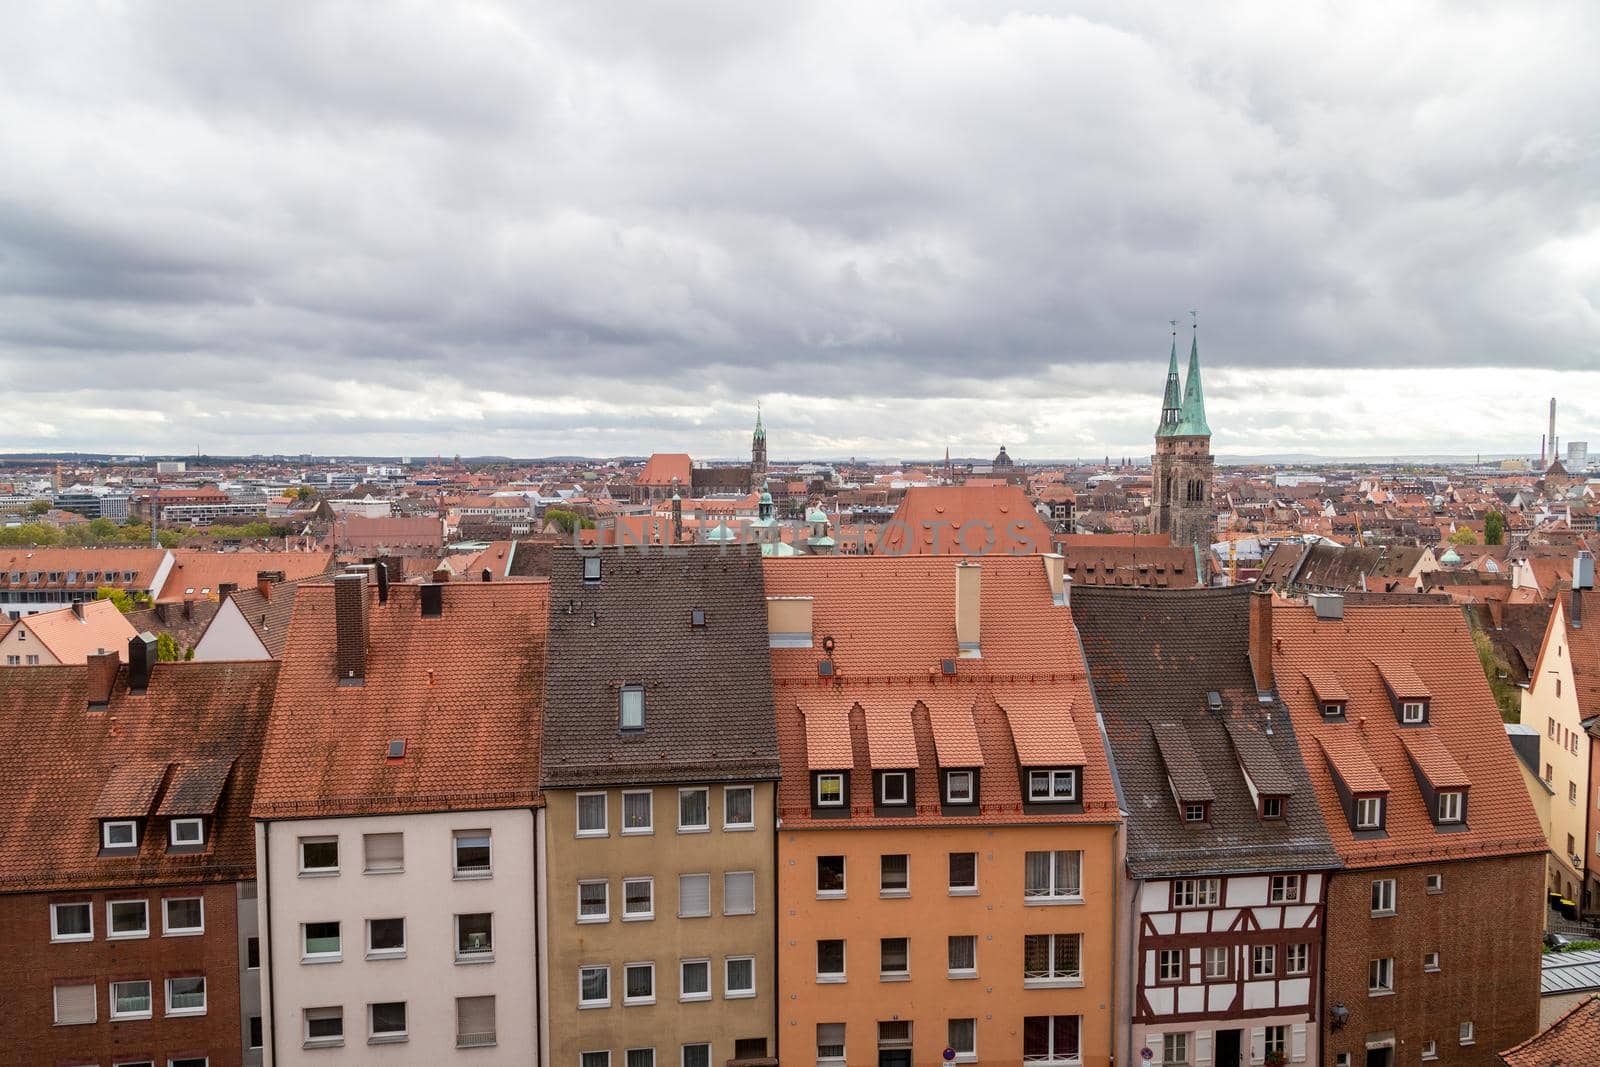 View from Nuremberg castle at the old city of Nuremberg, Bavaria, Germany by reinerc